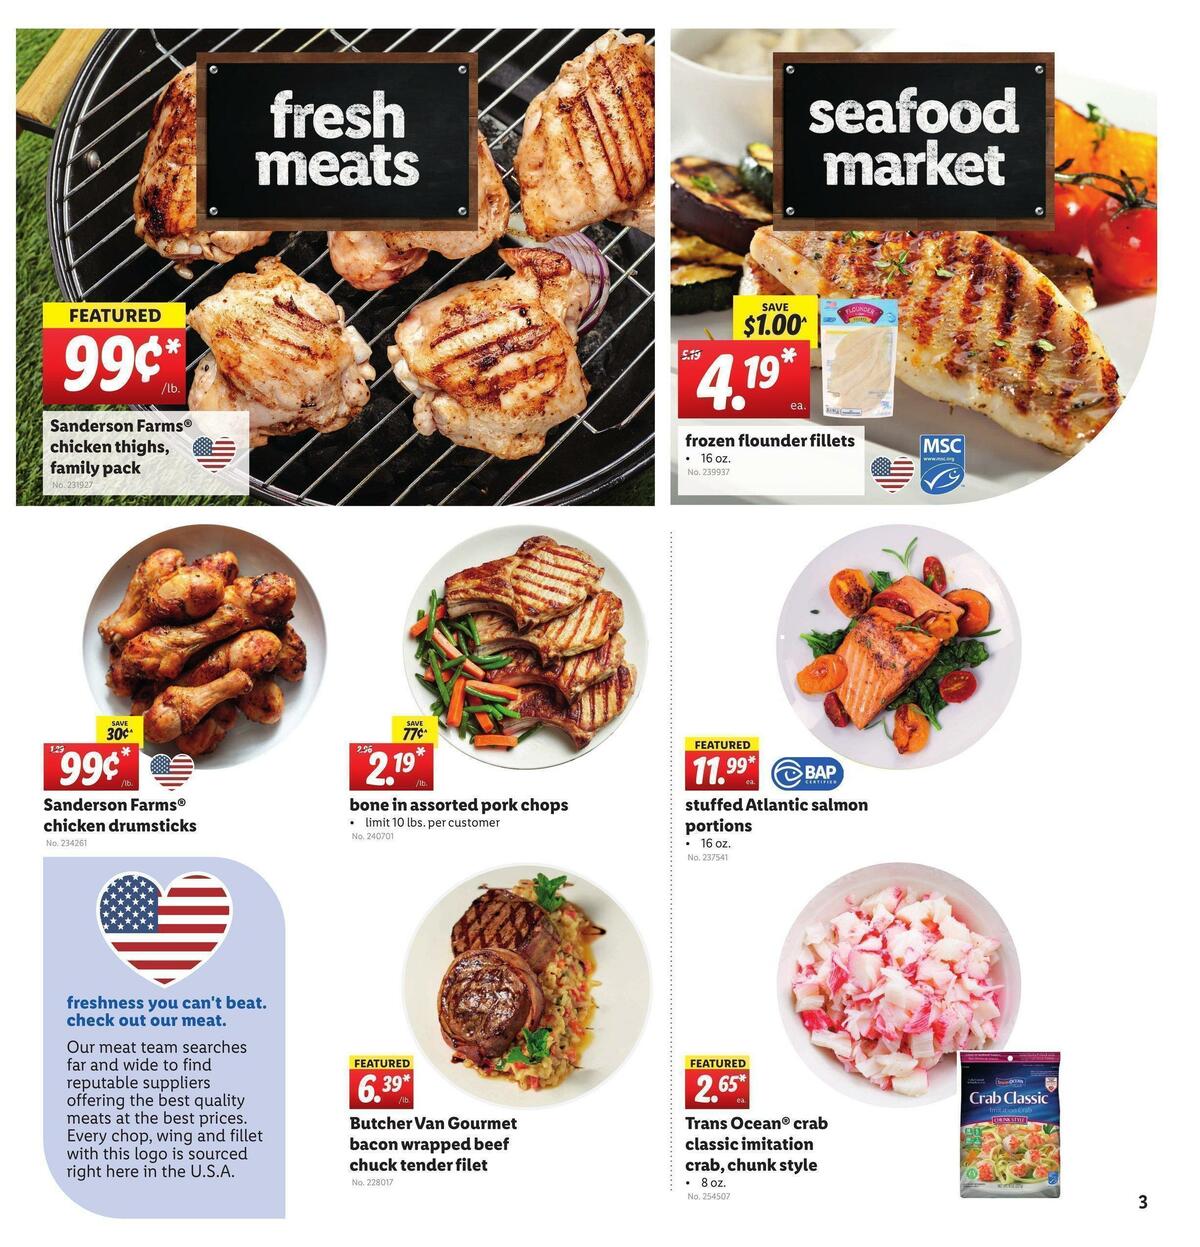 LIDL Weekly Ad from June 23